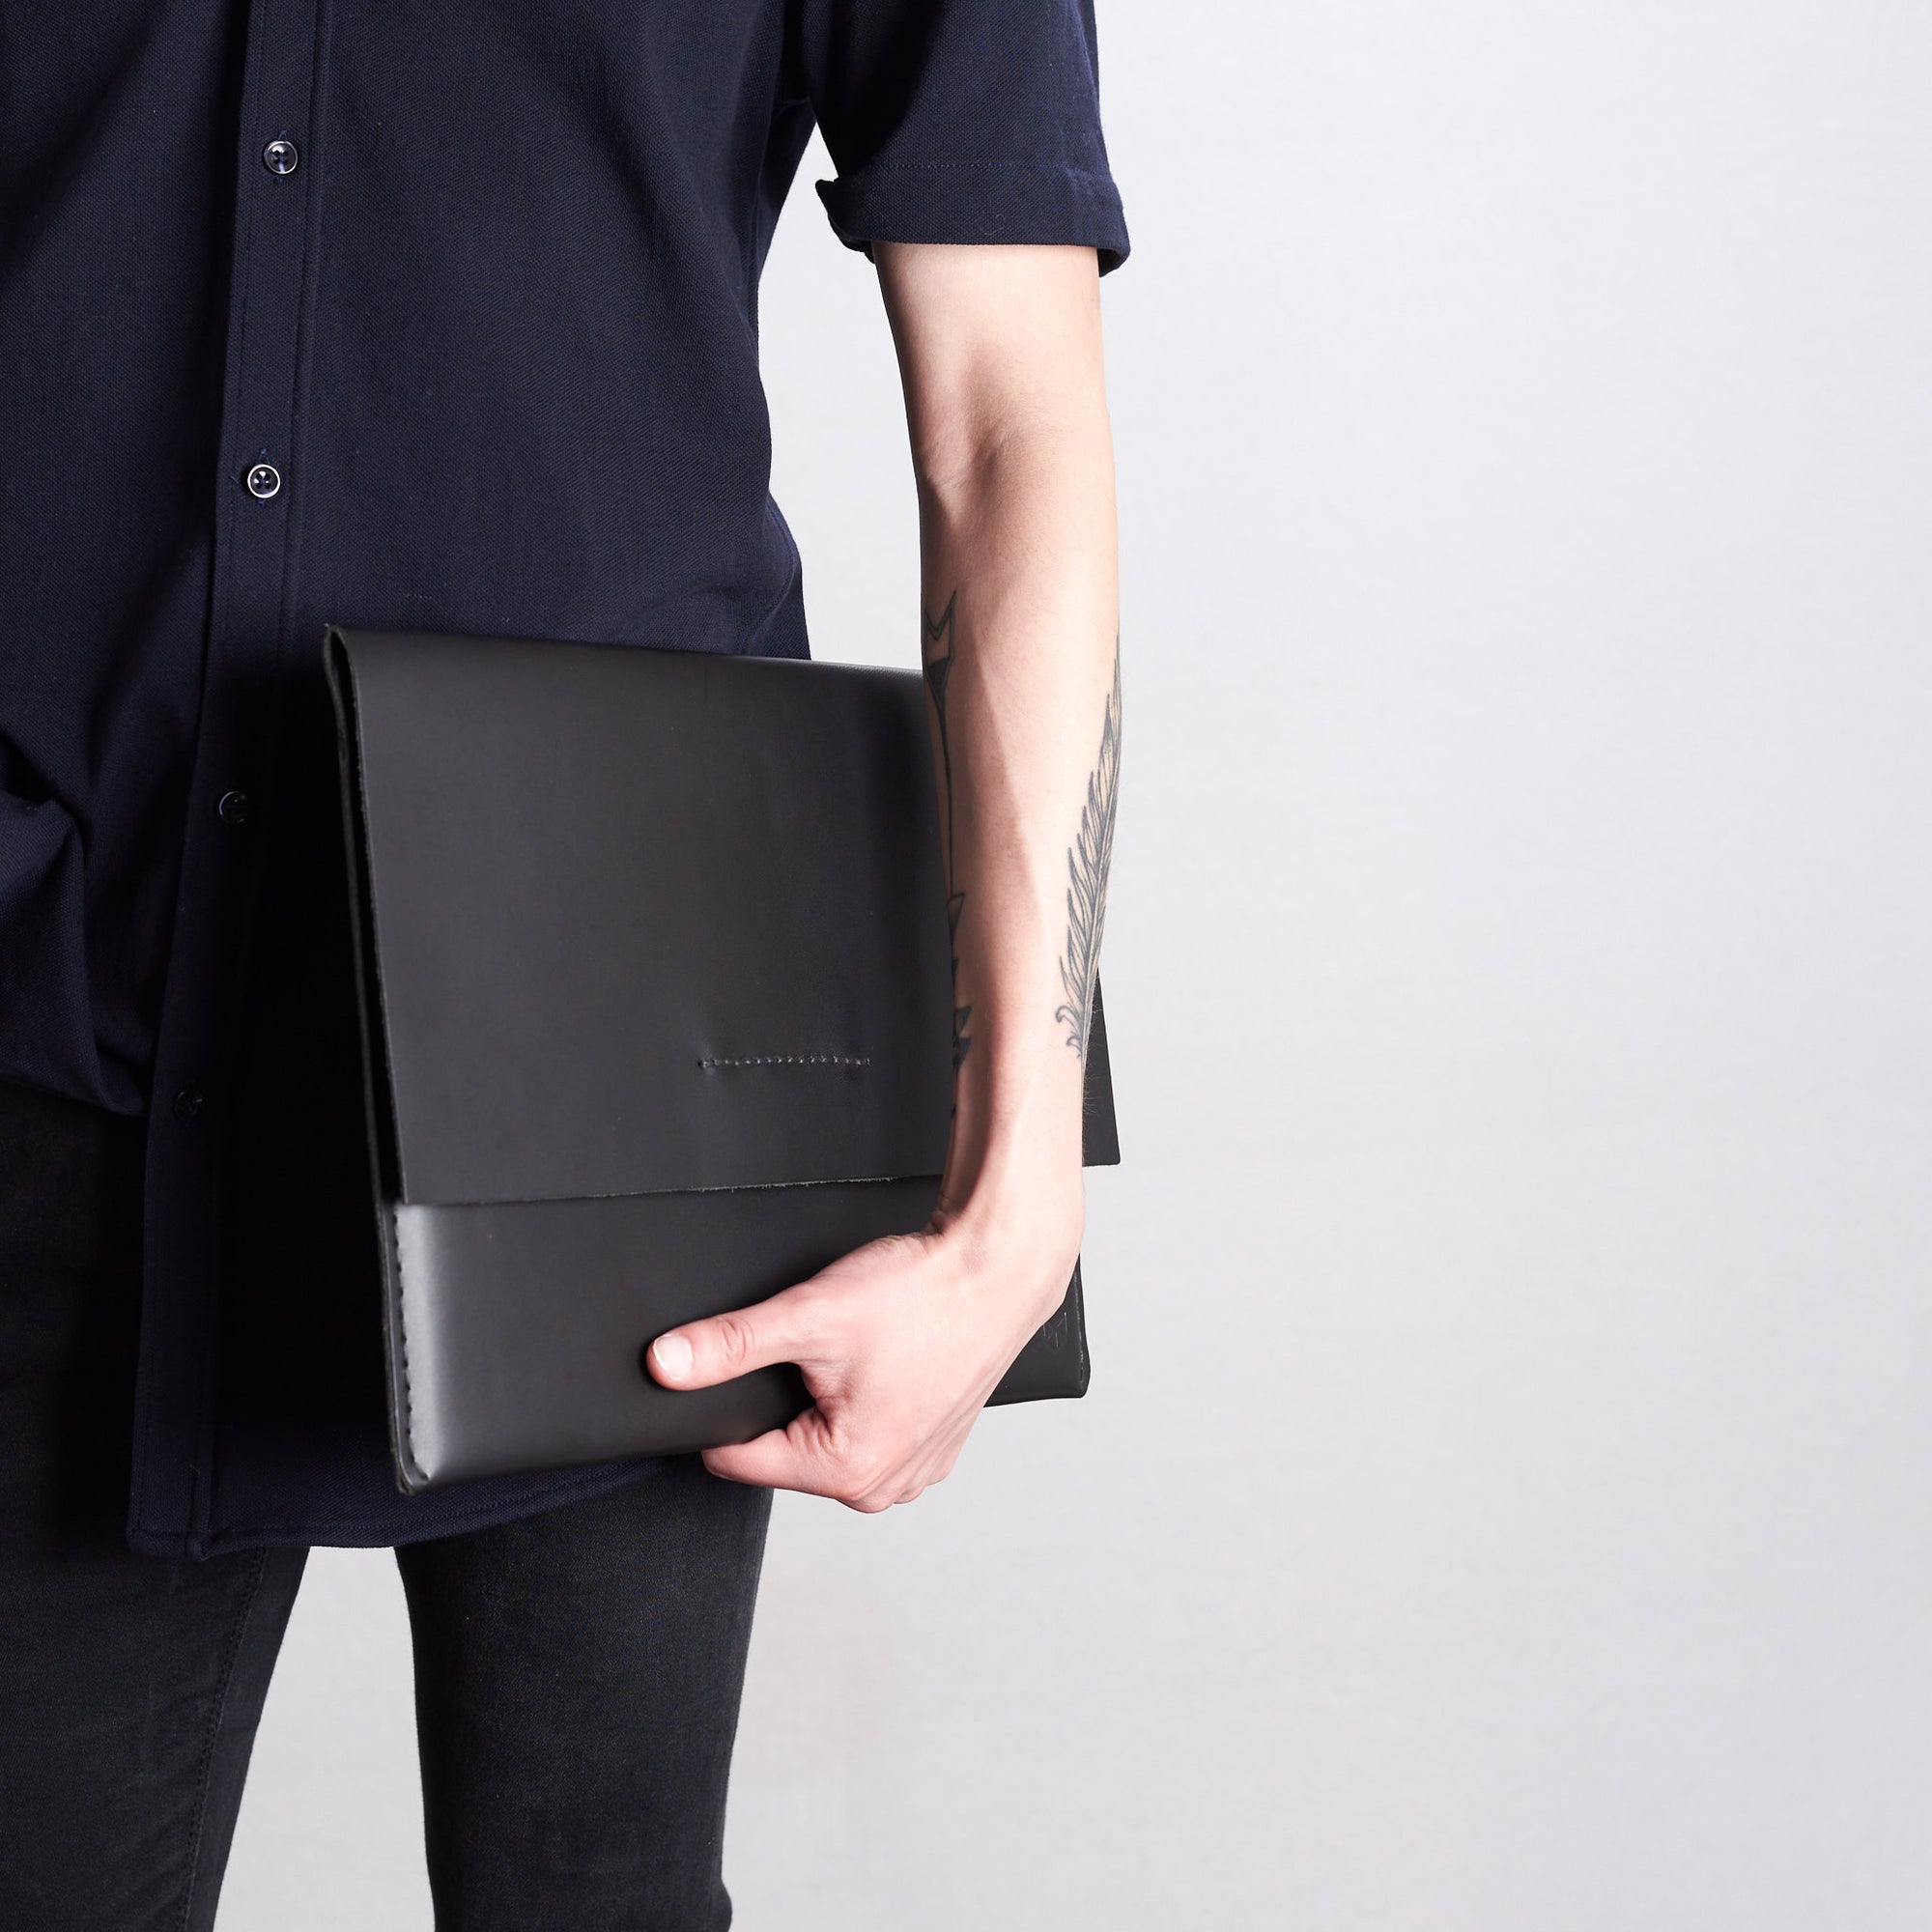 Style side model view of case. Black draftsman 1 case by Capra Leather. ZenBook sleeve.